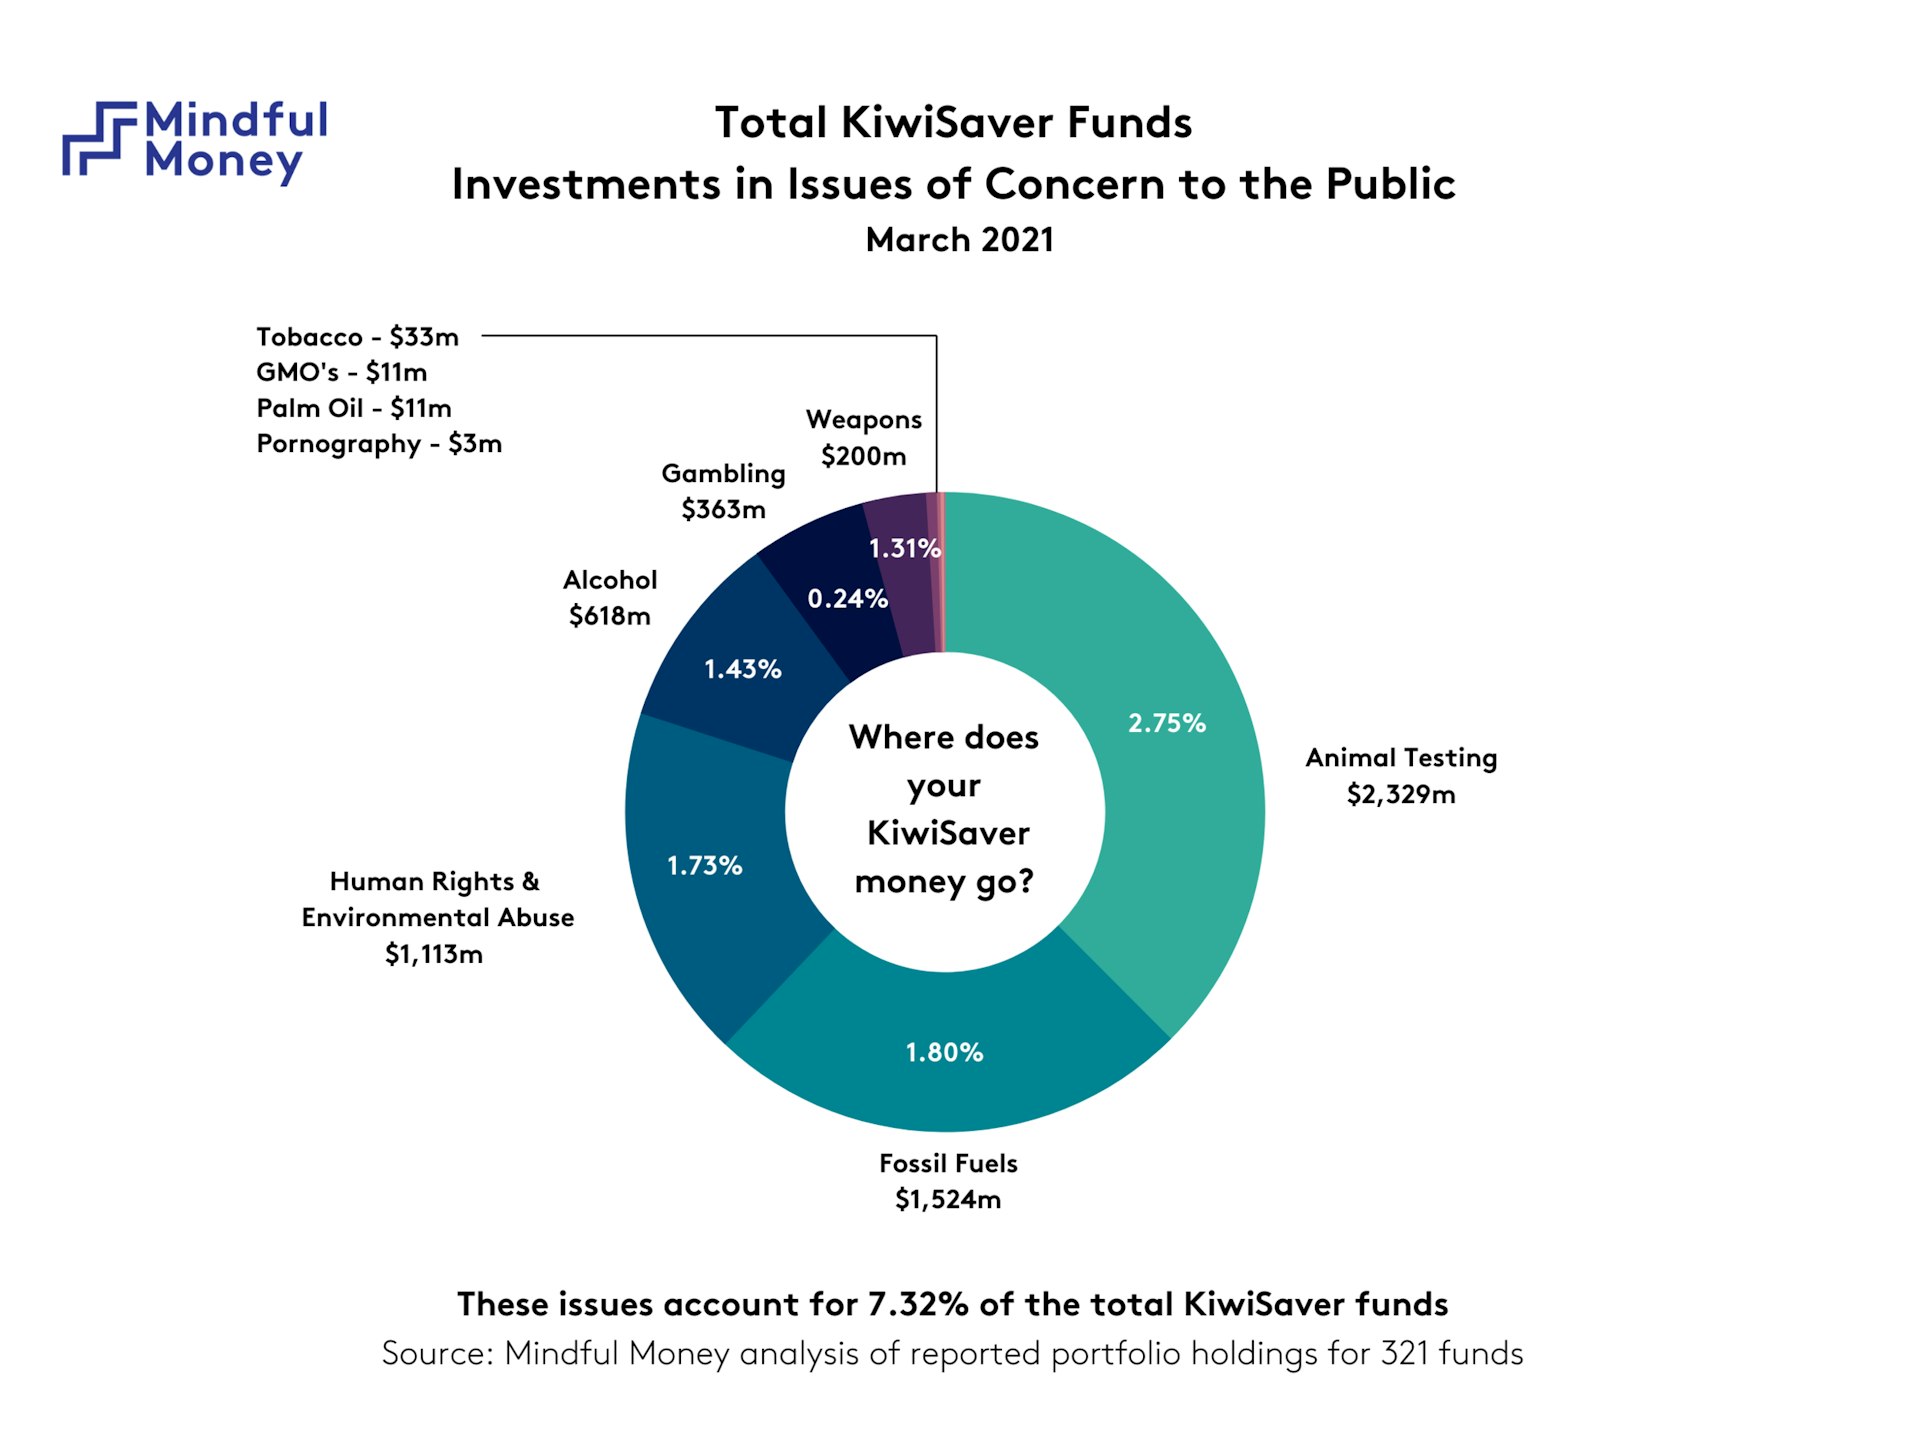 A pie chart showing how much KiwiSaver money is invested in issues of concern to the public as at March 2021. These issues account for 7.32% of the total KiwiSaver funds. $2.3 billion is invested in animal testing. $1.5 billion in fossil fuels. $1.1 billion in human rights and environment abuse. $618 million in alcohol. $363 million in gambling. $200 million in weapons. $33 million in tobacco. $11 million in genetically modified organisms. $11 million in palm oil. $3 million in pornography. Source: Mindful Money analysis of reported portfolio holdings for 321 funds.